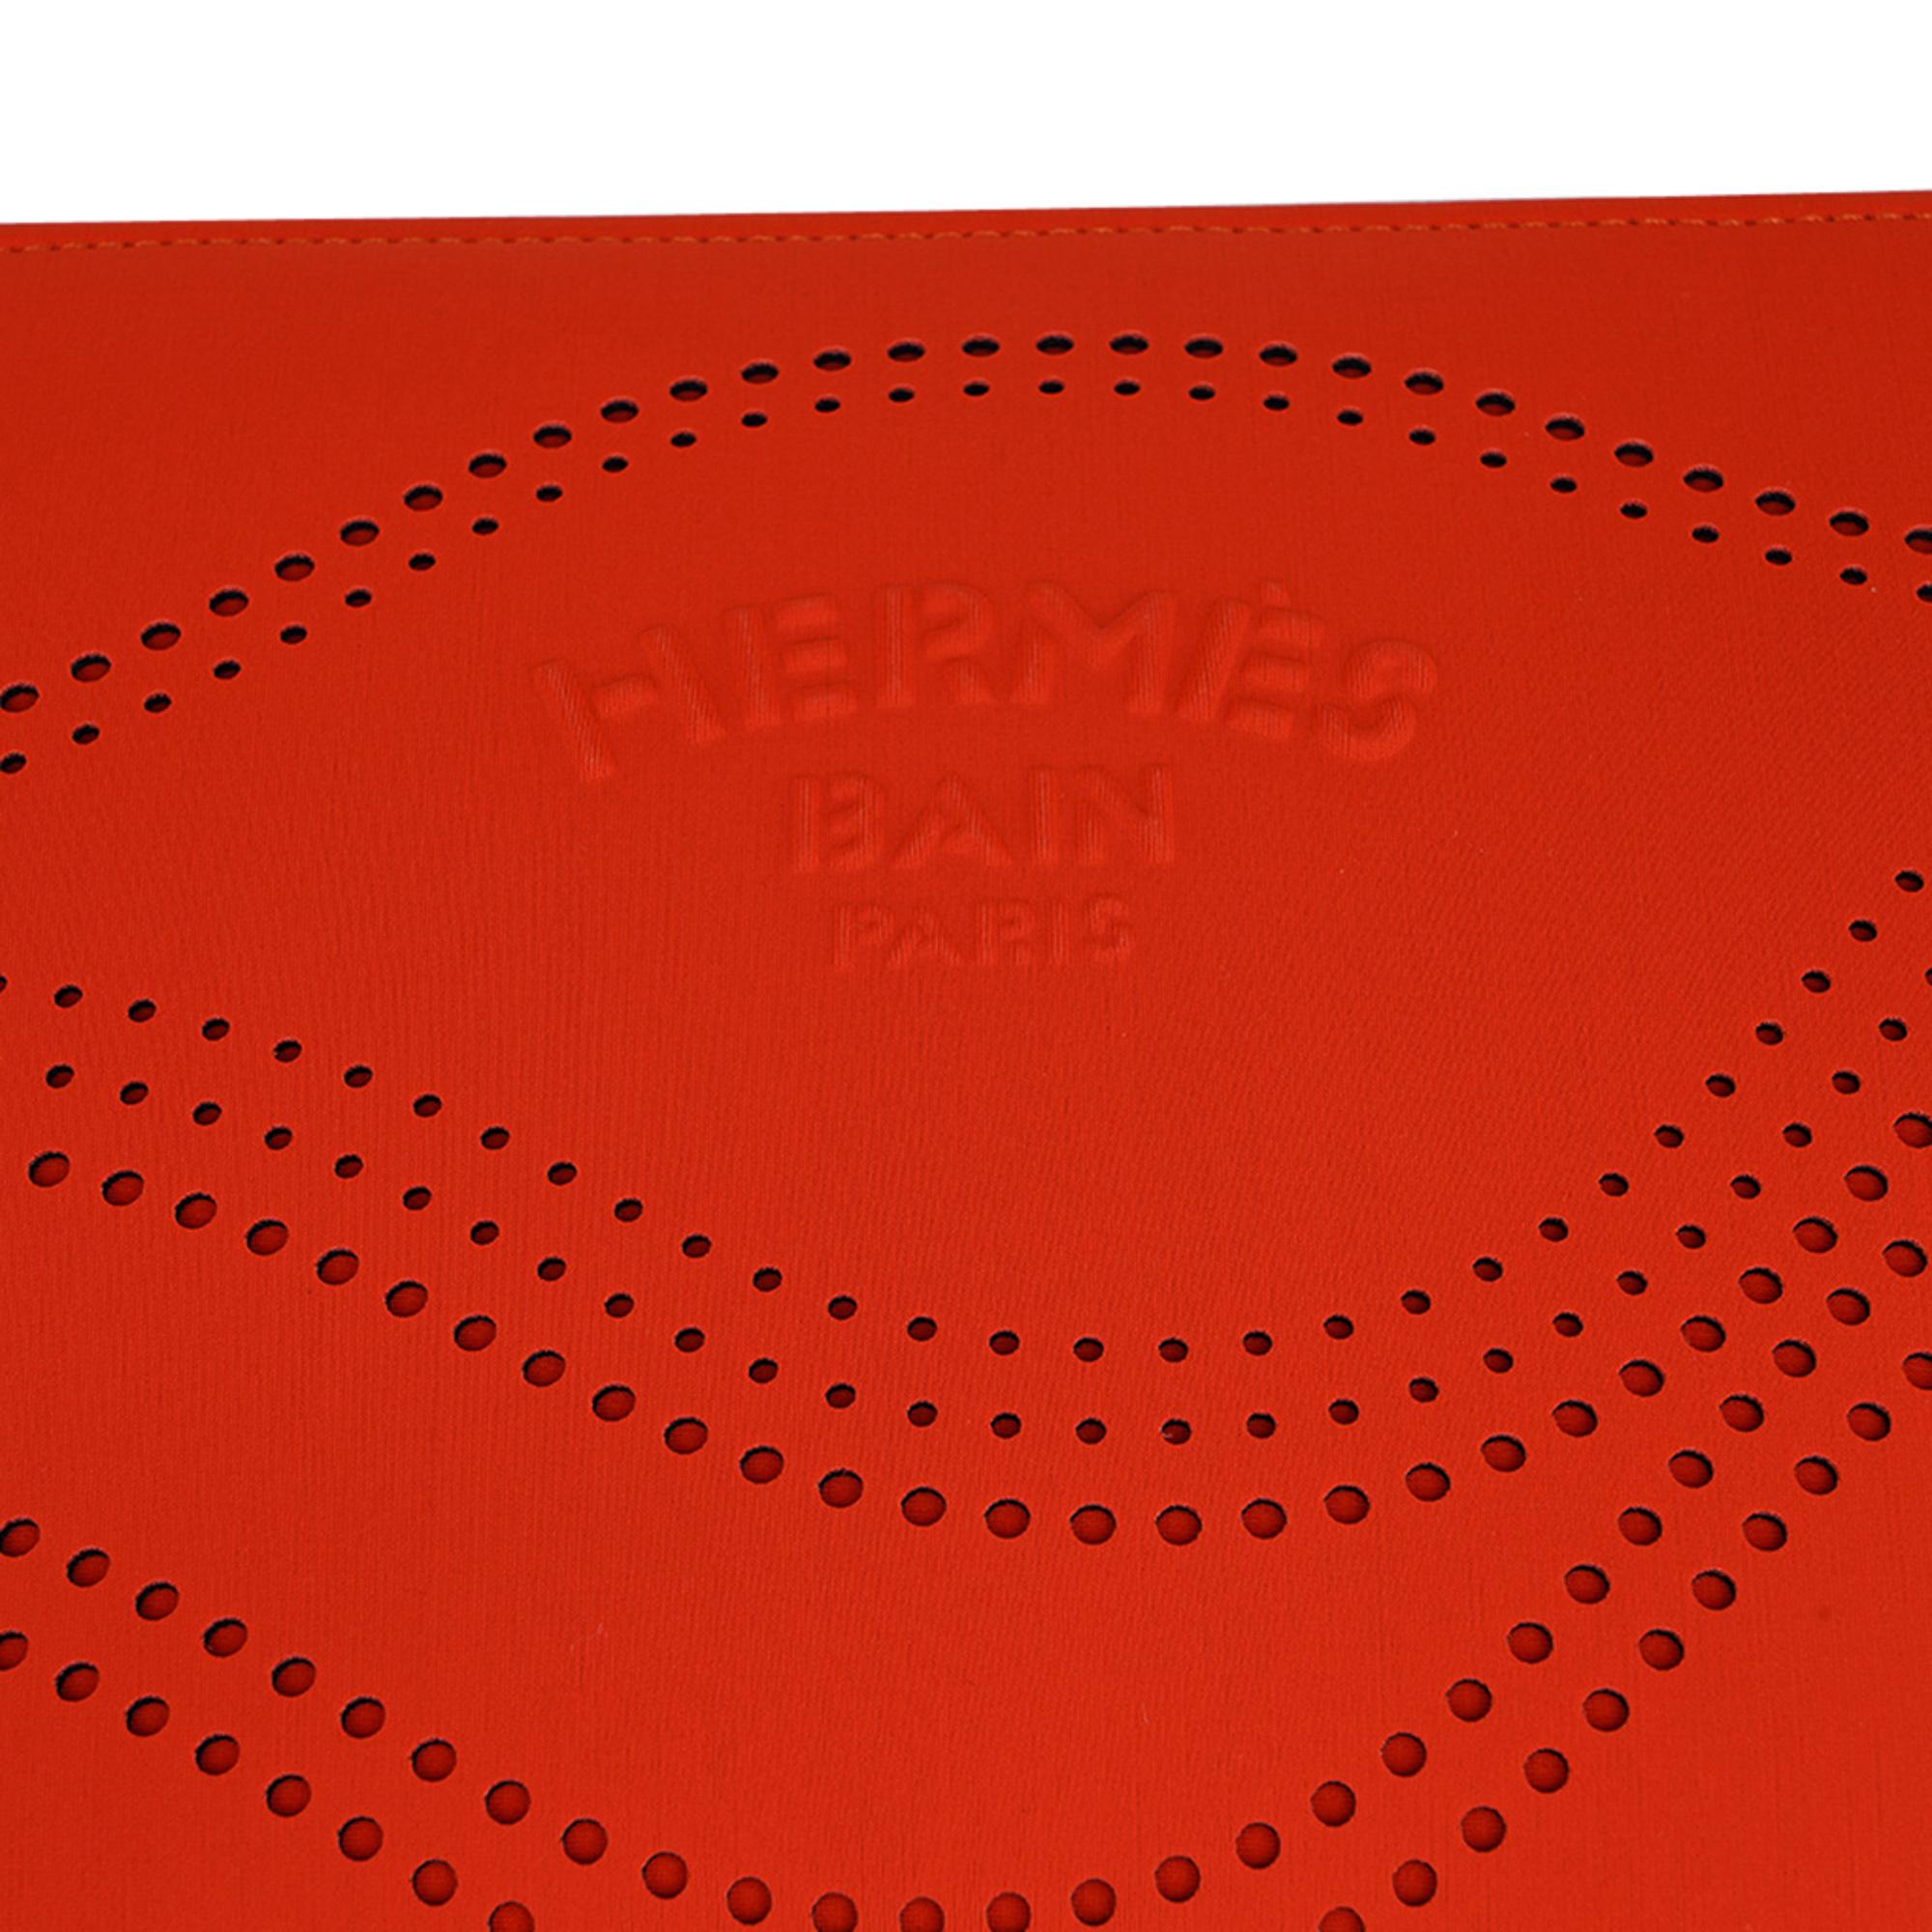 Mightychic offers an Hermes Neobain Waves case featured in Potiron.
Perforated 